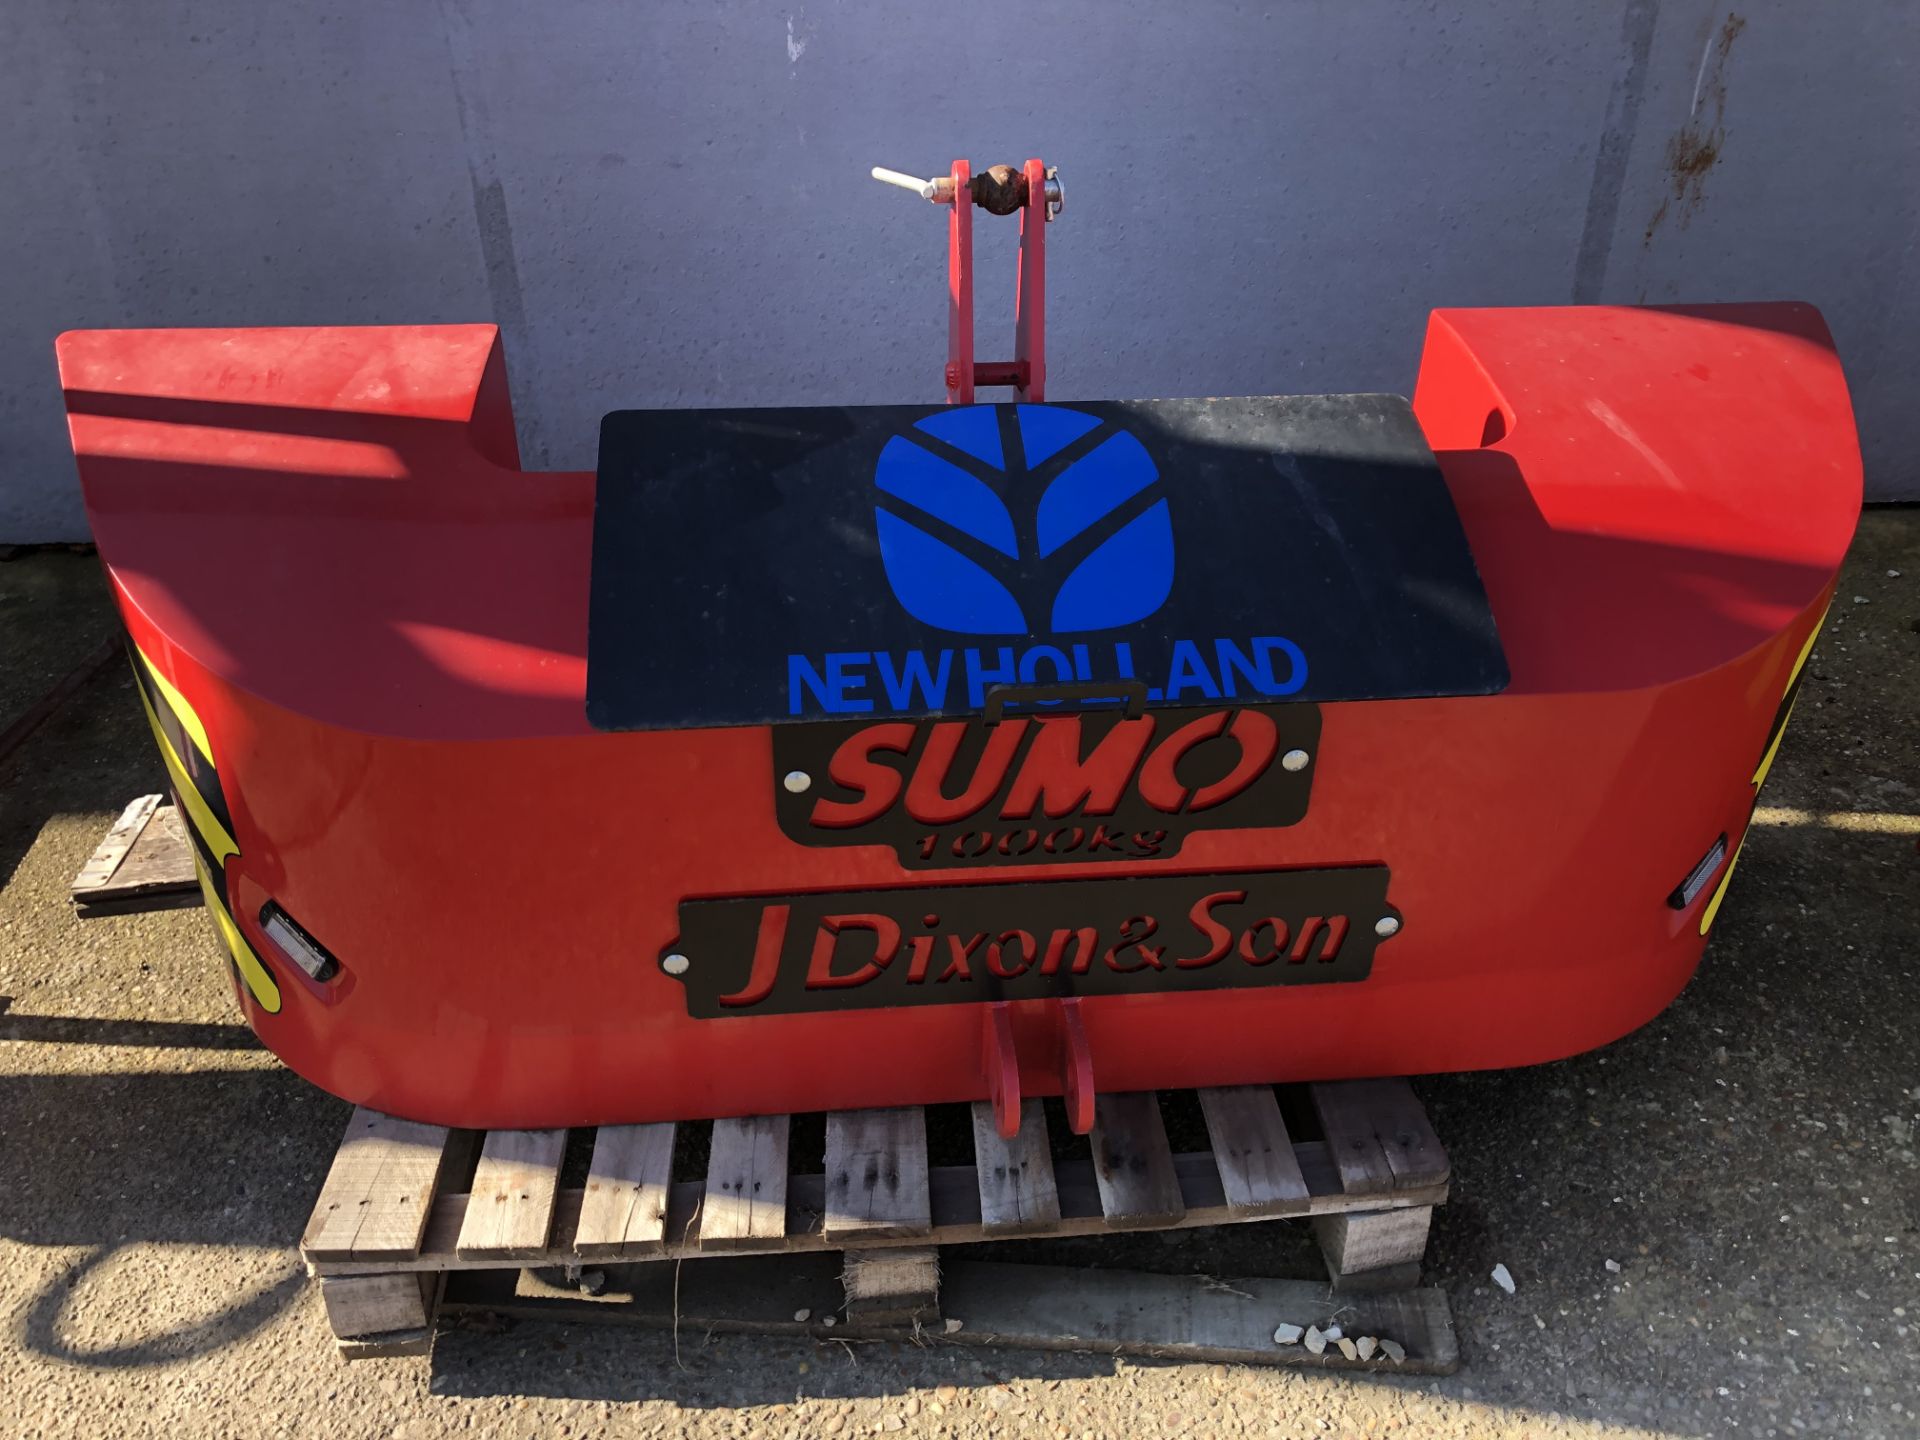 Sumo 1000kgs front mounted Weight Block c/w tool box (to fit the above). - Image 2 of 4